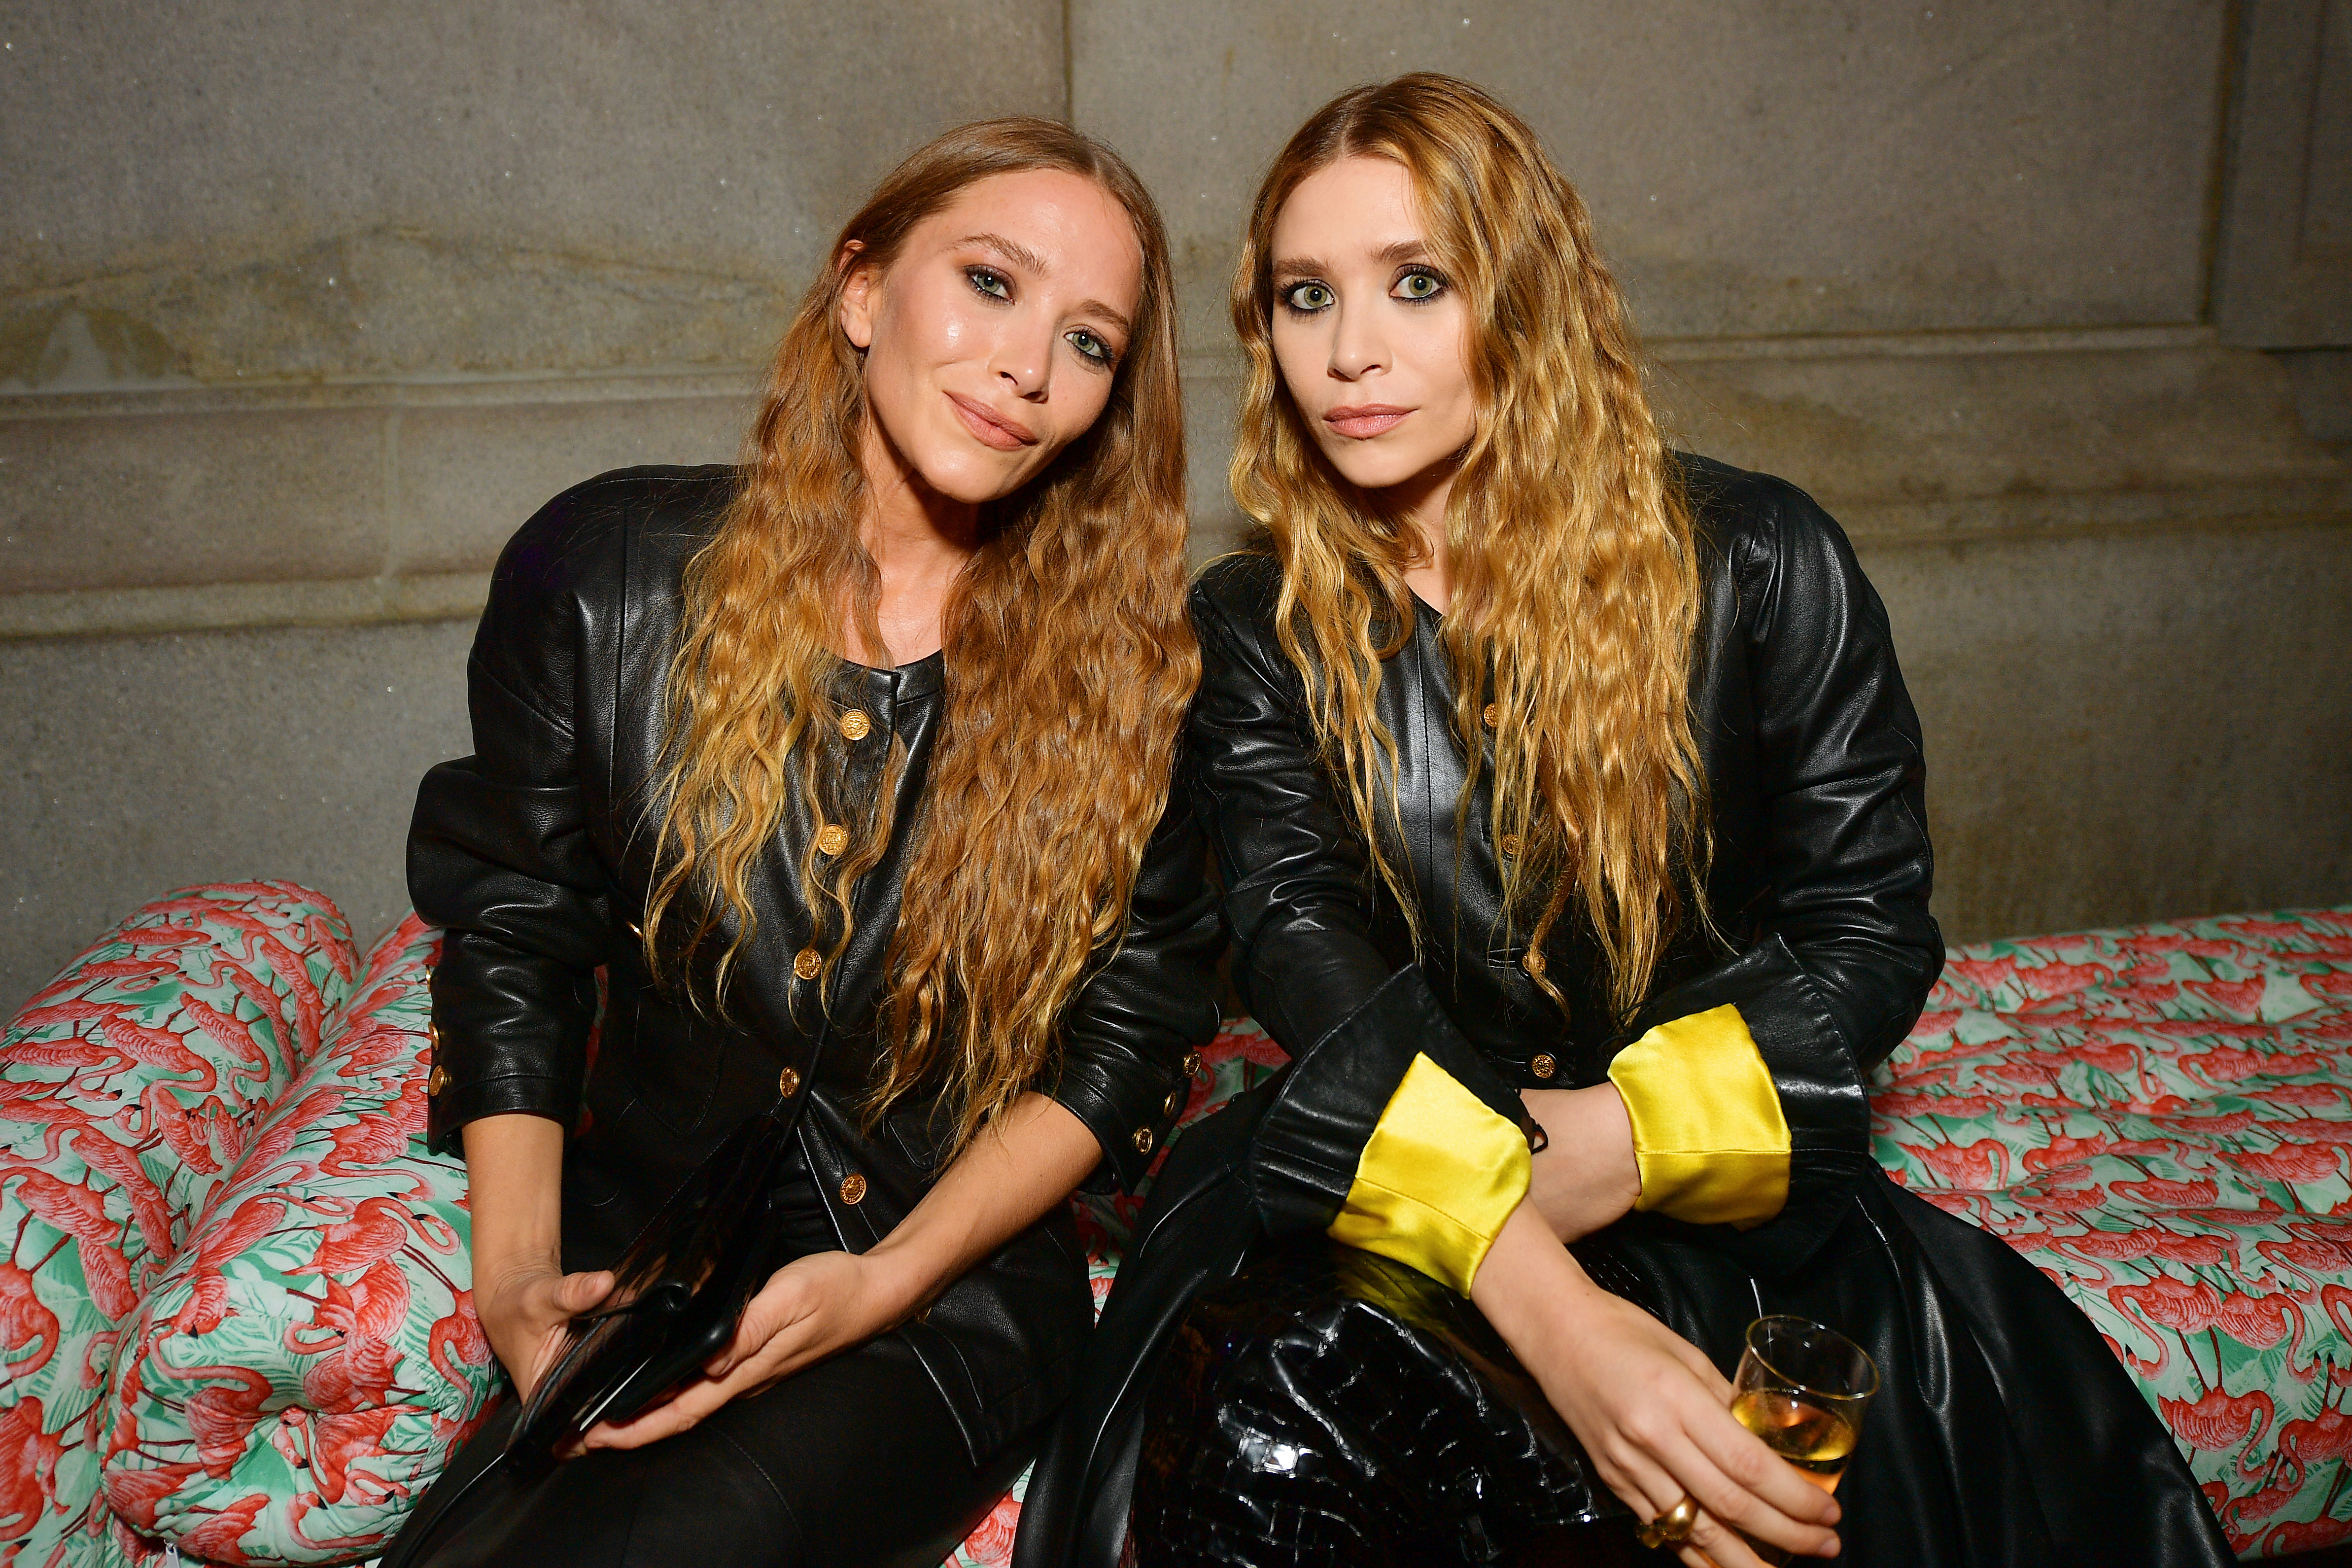 Mary-Kate pictured with twin sister Ashley Olsen in May 2019